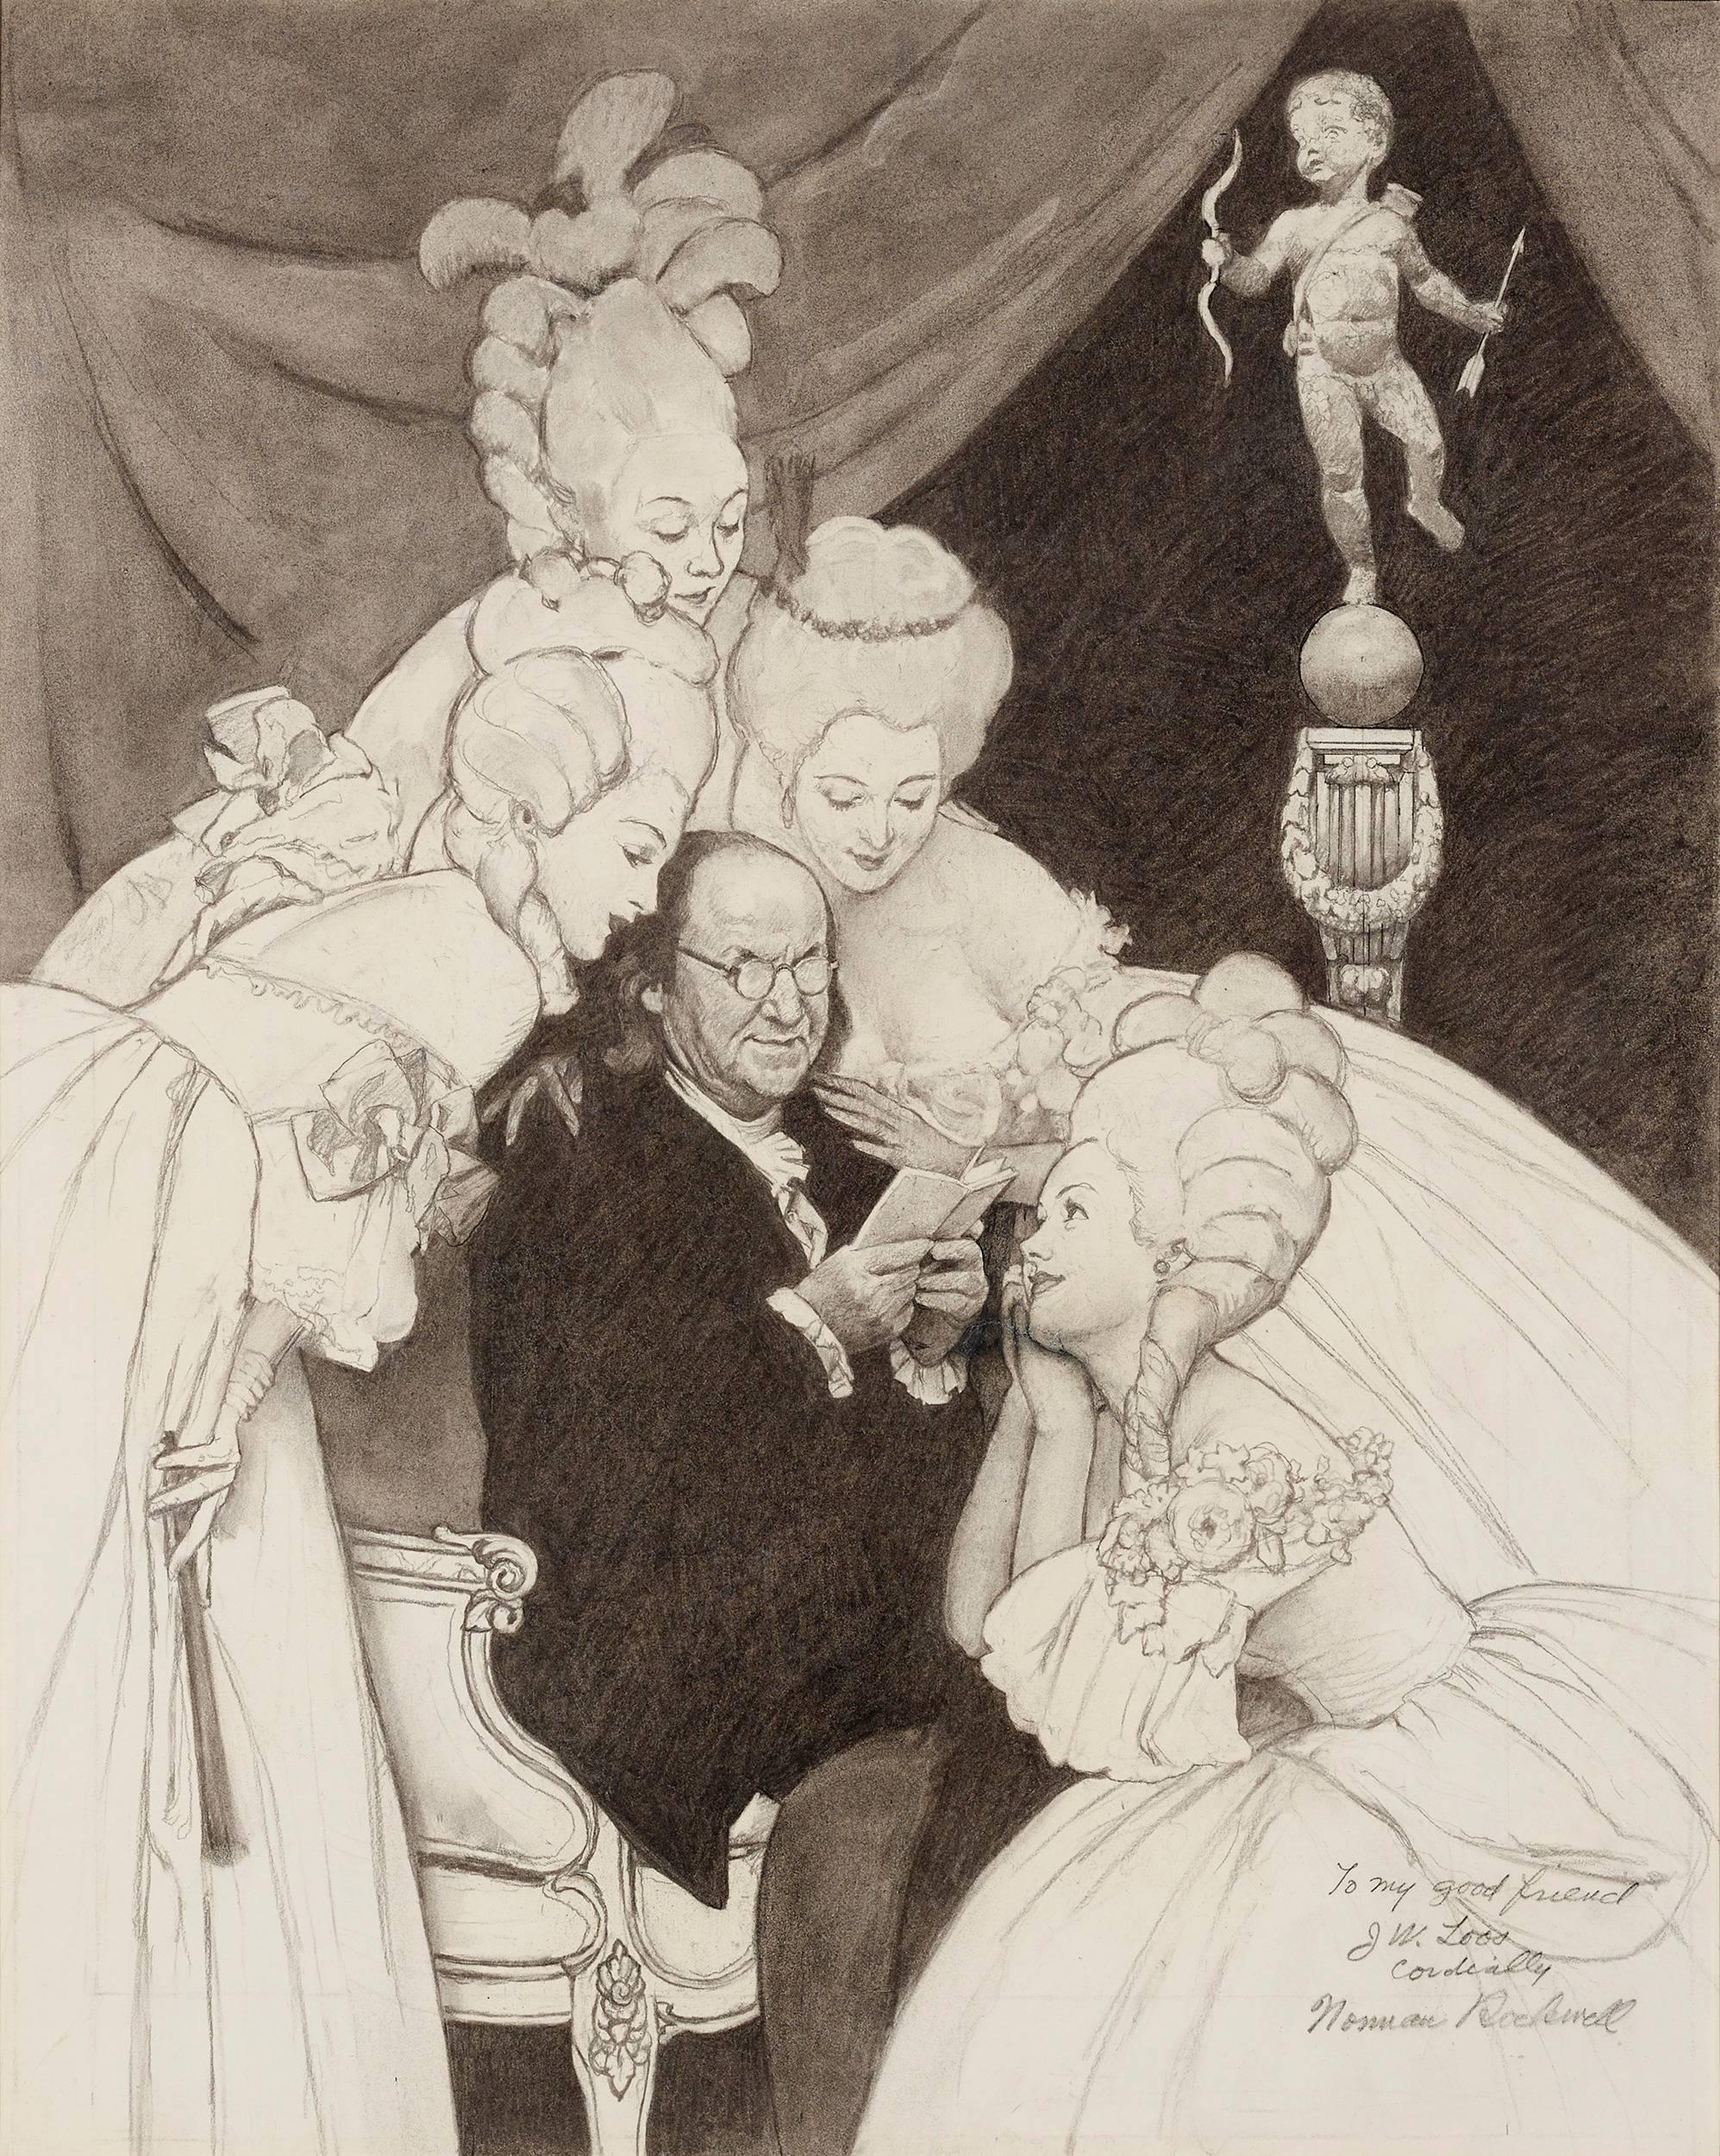 Norman Rockwell
1894-1978  American

Poor Richard's Almanack (Ben Franklin's Belles)

Signed and dedicated "To my good friend JW. Loos / Cordially / Norman Rockwell" (lower right)
Charcoal on paper

This humorous drawing by the celebrated American